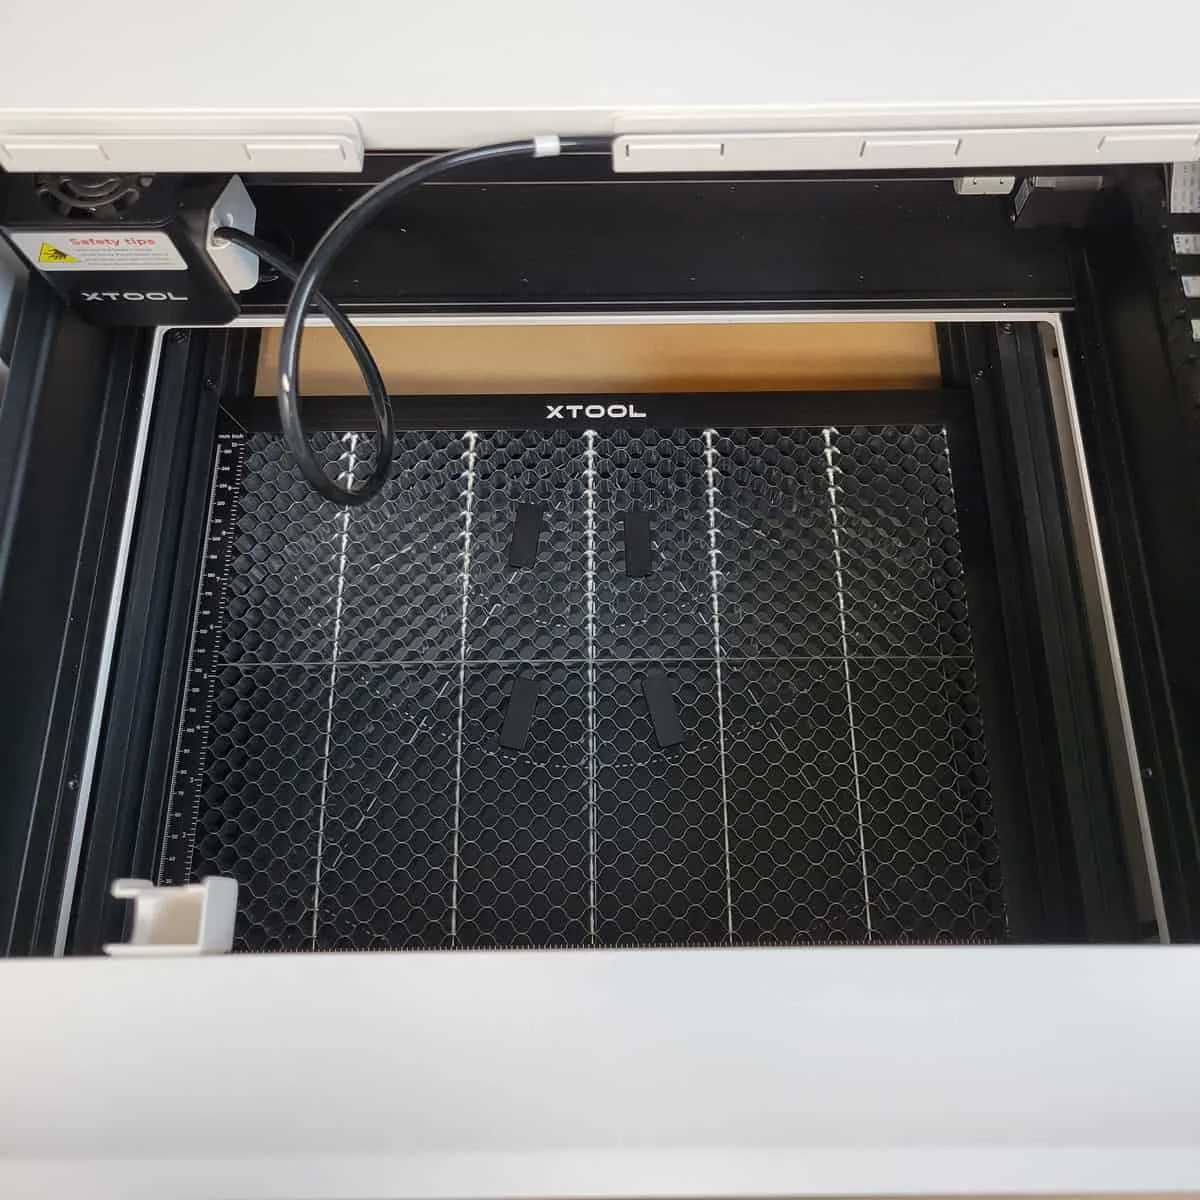 inside xTool M1 laser with honeycomb panel